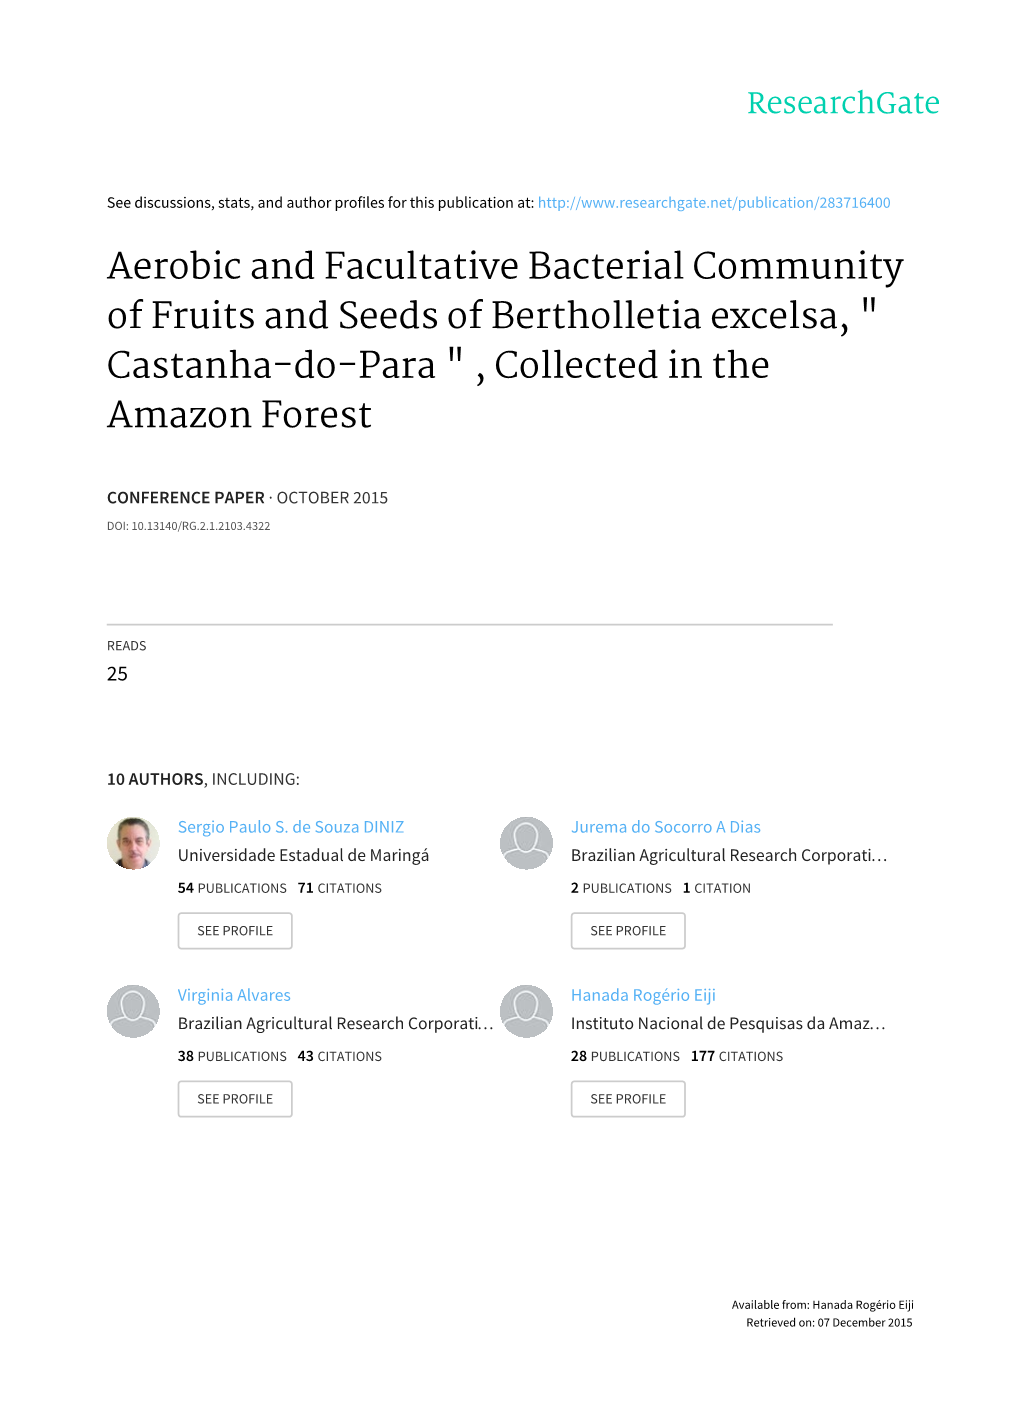 Aerobic and Facultative Bacterial Community of Fruits and Seeds of Bertholletia Excelsa, " Castanha-Do-Para " , Collected in the Amazon Forest